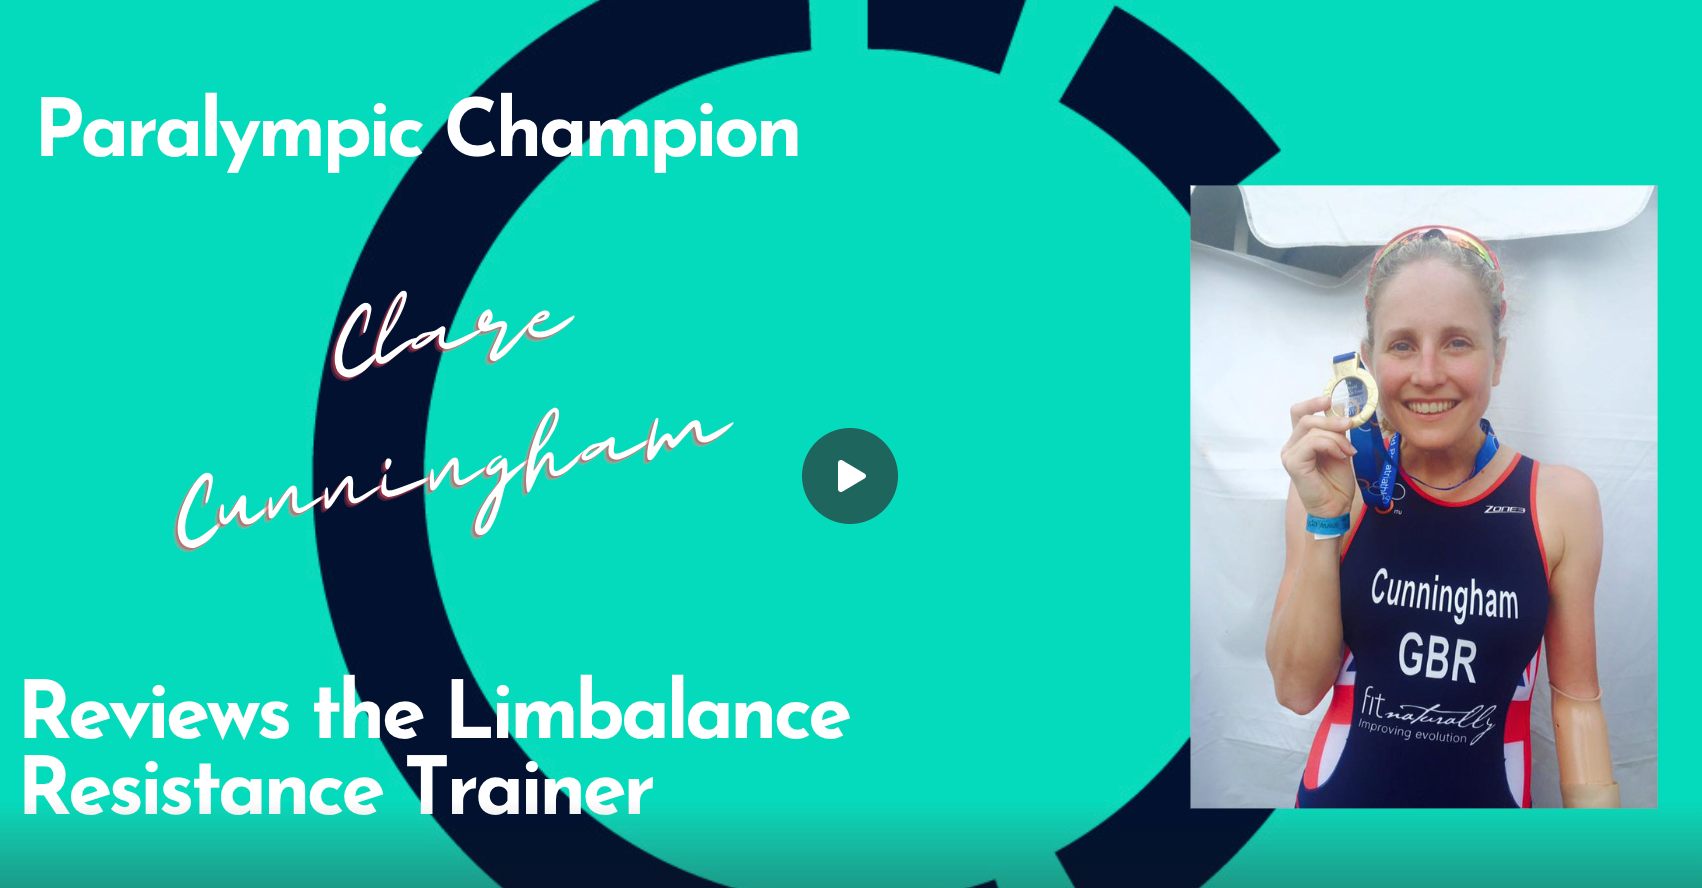 Load video: Clare Cunningham is a Paralympic champion with a string of gold and silver medals to her name. Clare was born with one hand and keeping fit and healthy is in her DNA. She is an avid cyclist and runner and is always looking for new approaches to improve her workout routine.  Today, she shares her review of the Limbalance Resistance Trainer, which allows people with an upper limb difference or grip issue to work out their upper body and core, and address muscle imbalance across the body.